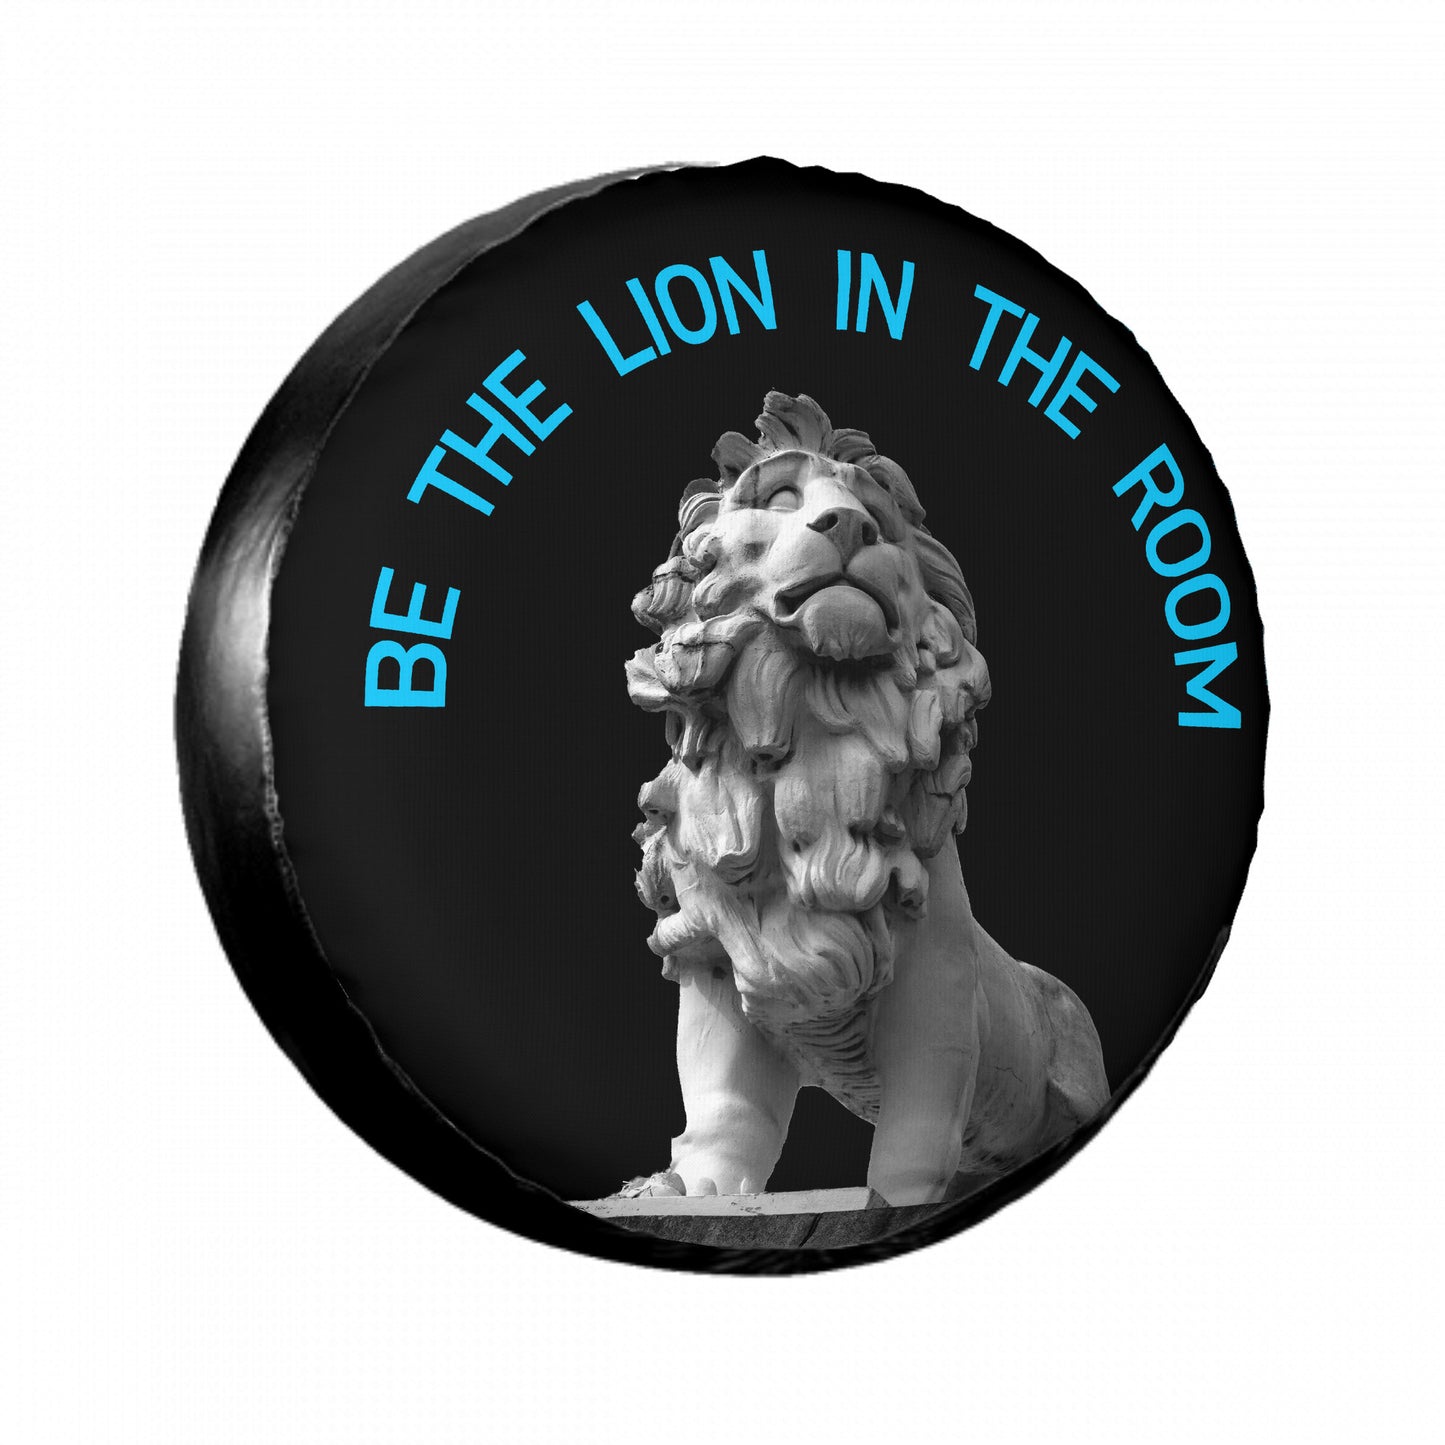 Be The Lion In The Room Spare Wheel Cover- Spare Tire Wheel Cover Sizes 14-17